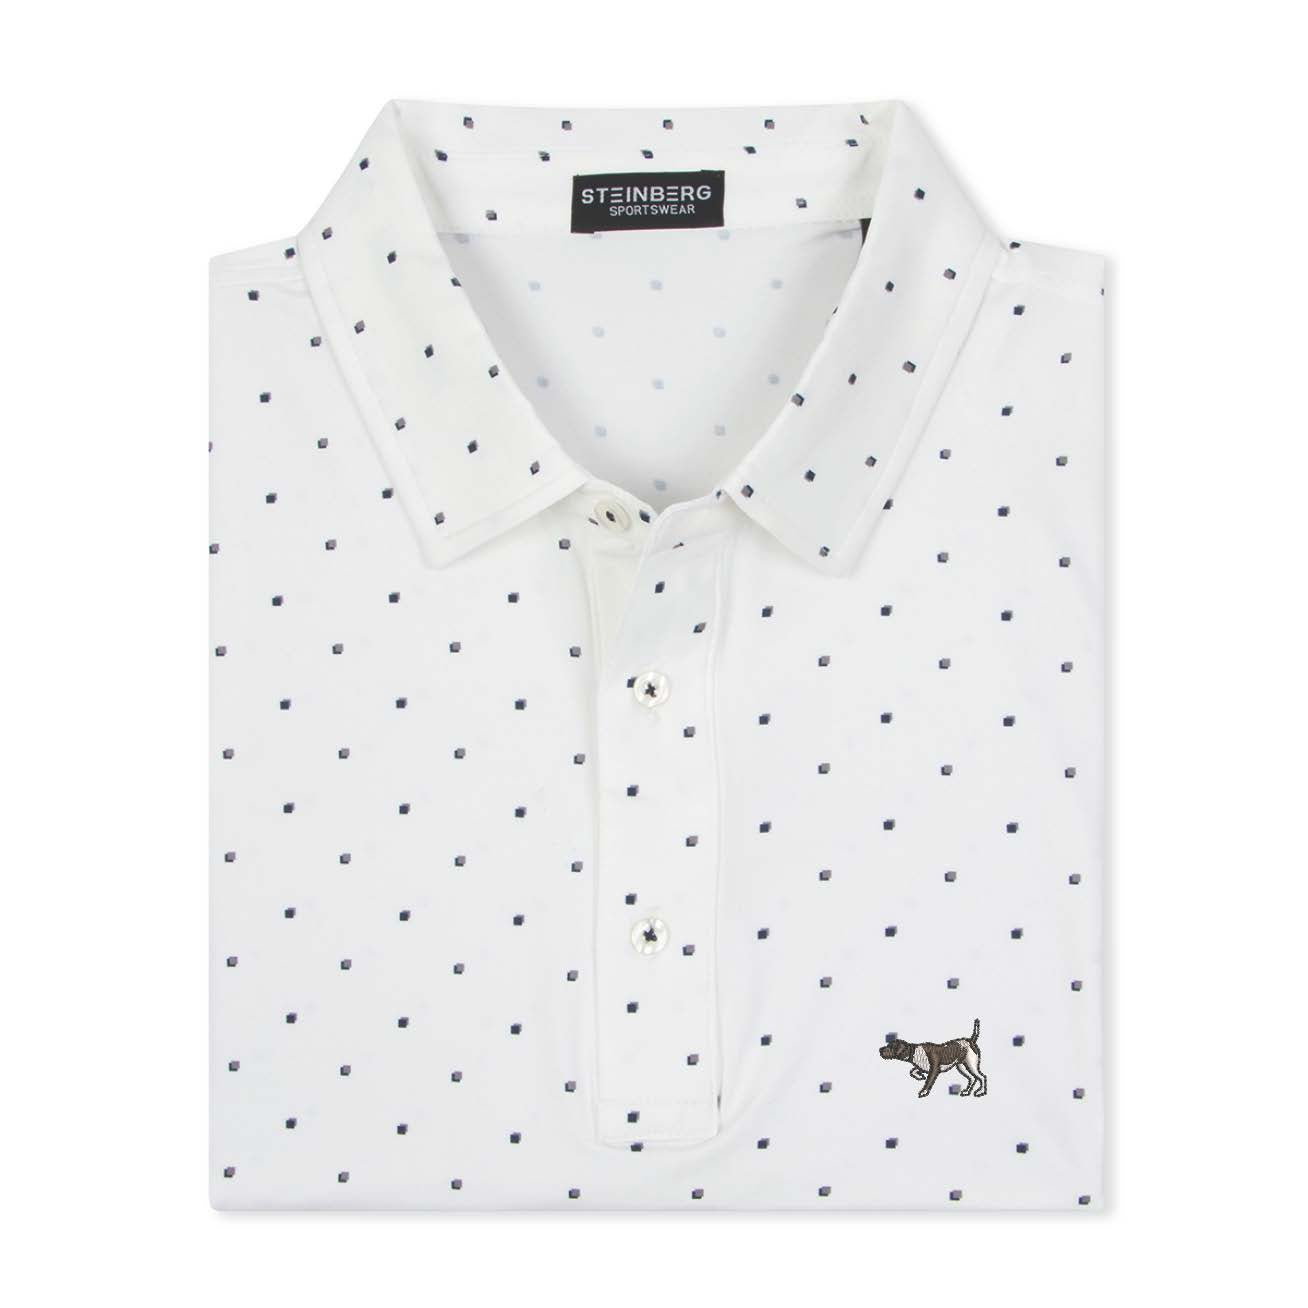 The All Square Performance Polo Pointer Collection